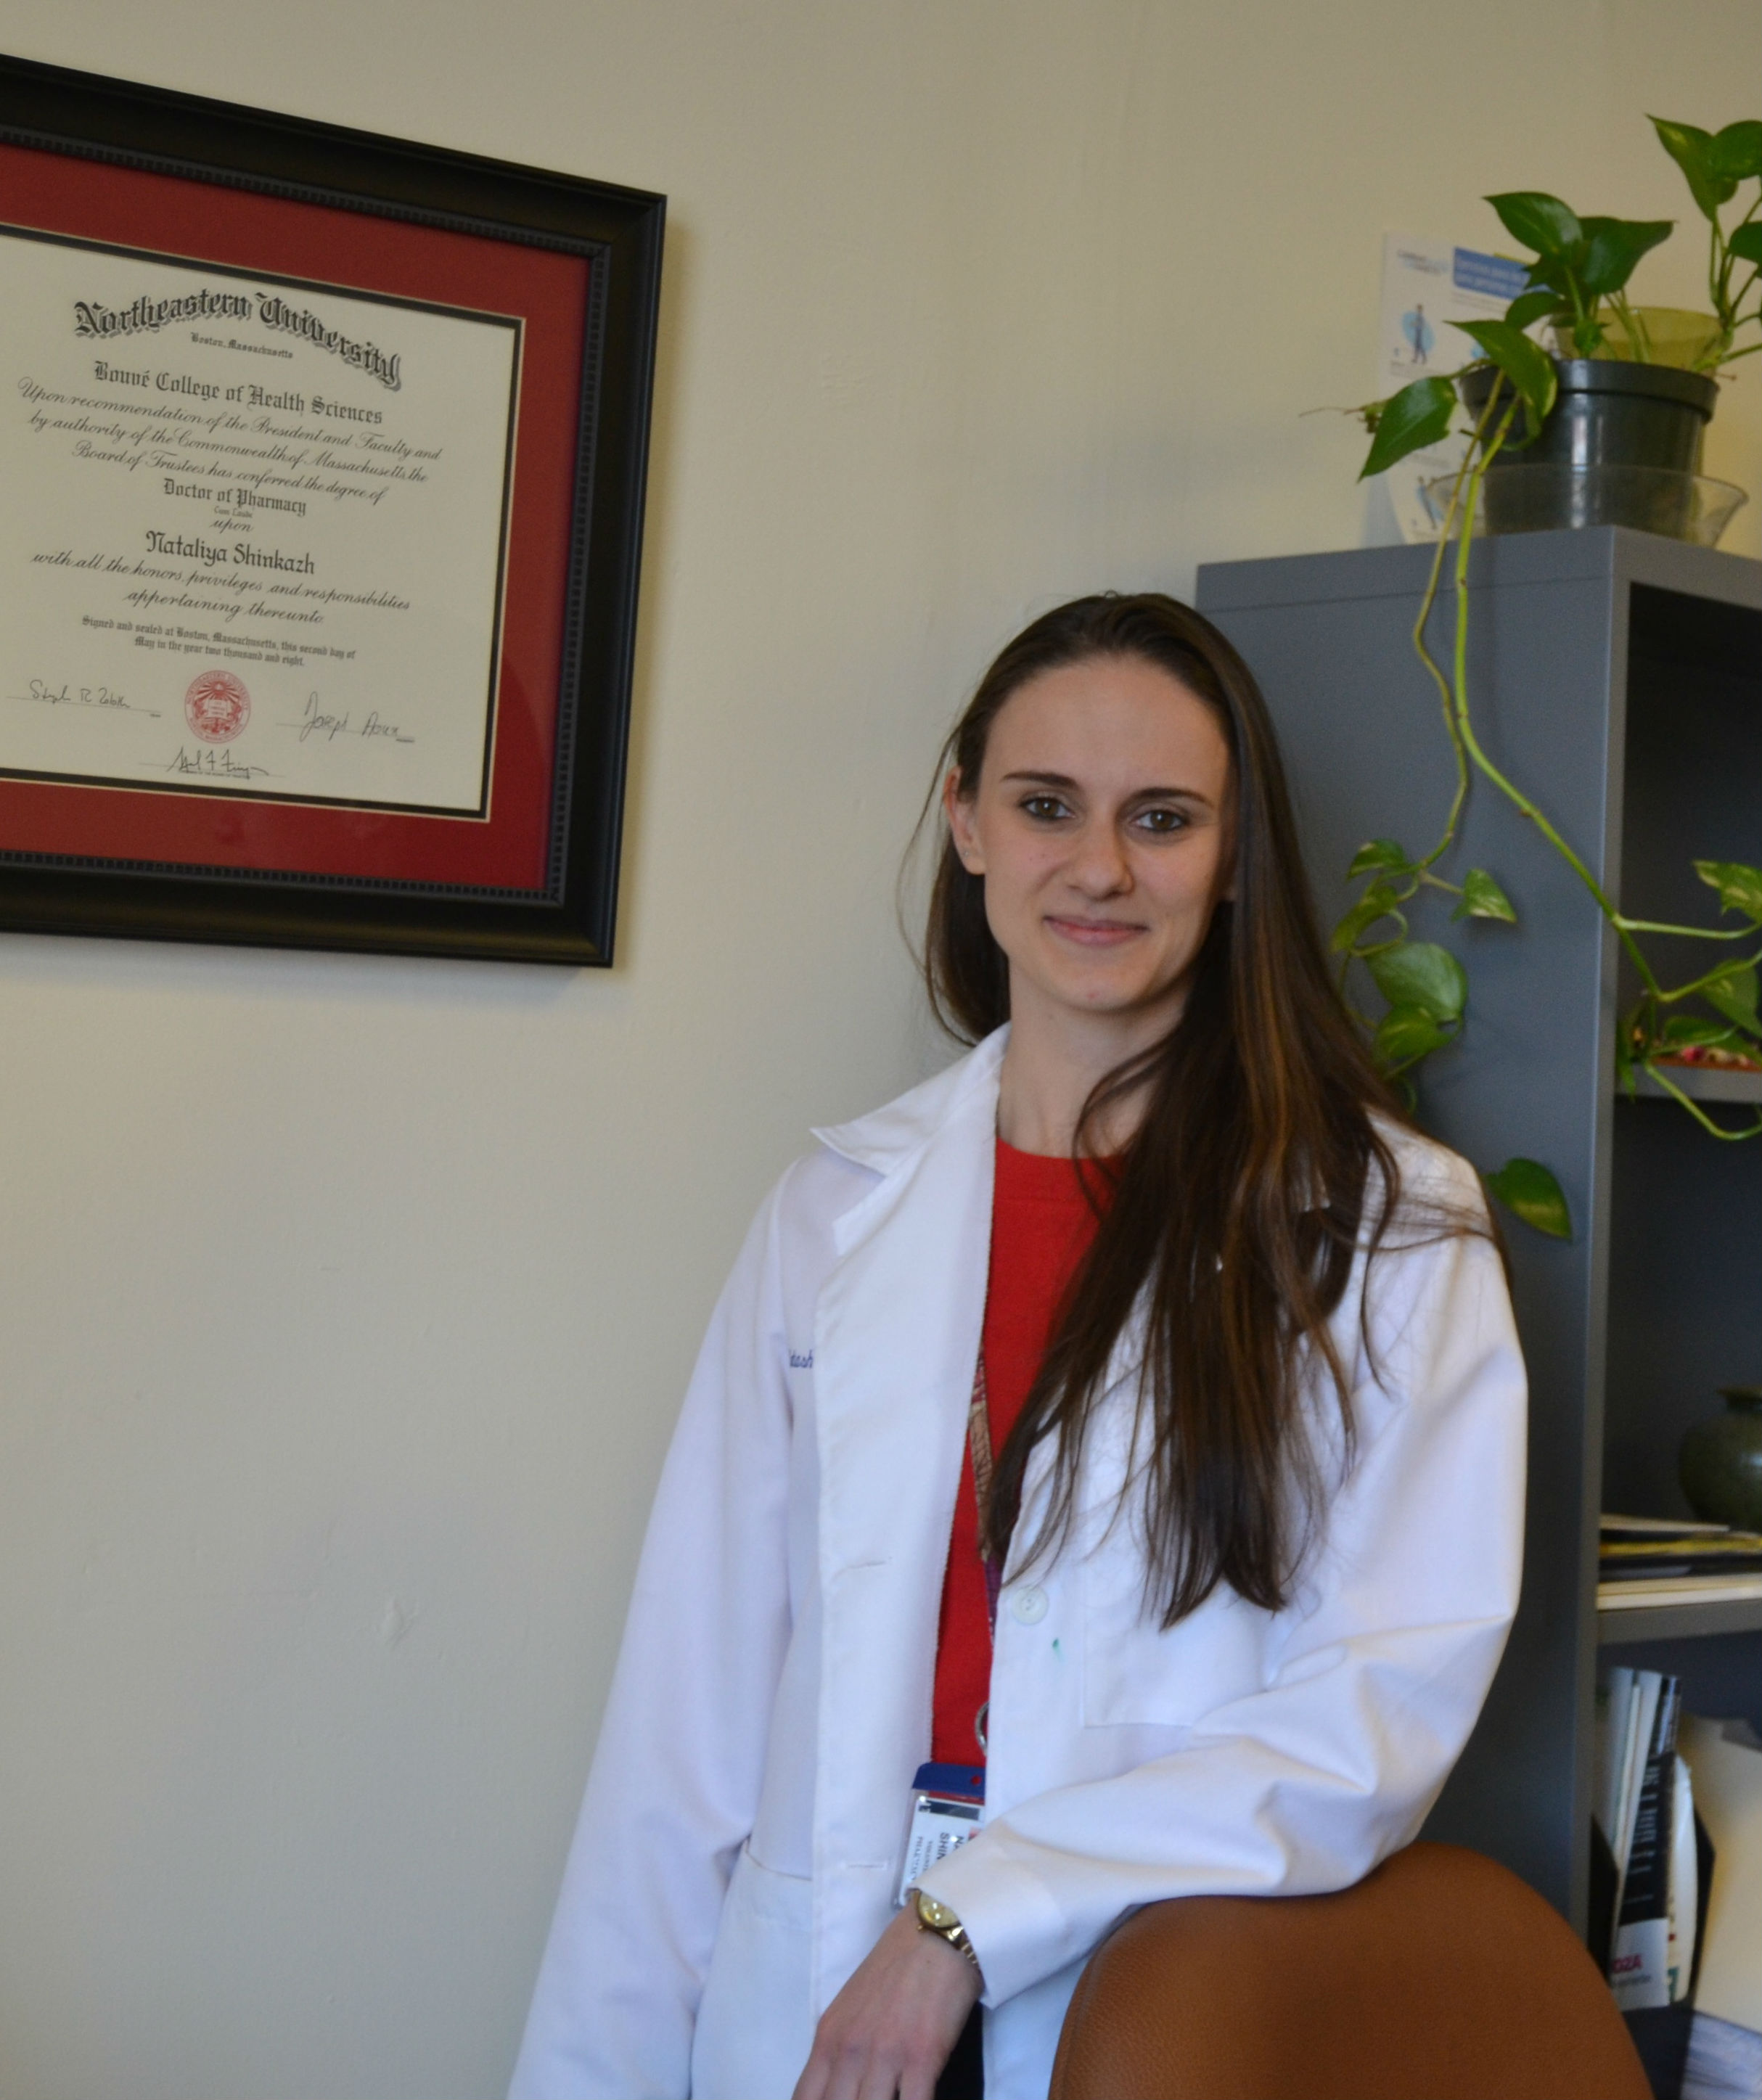 Touro College of Pharmacy's Assistant Clinical Professor in Ambulatory Care Pharmacy Practice, Dr. Nataliya Shinkazh